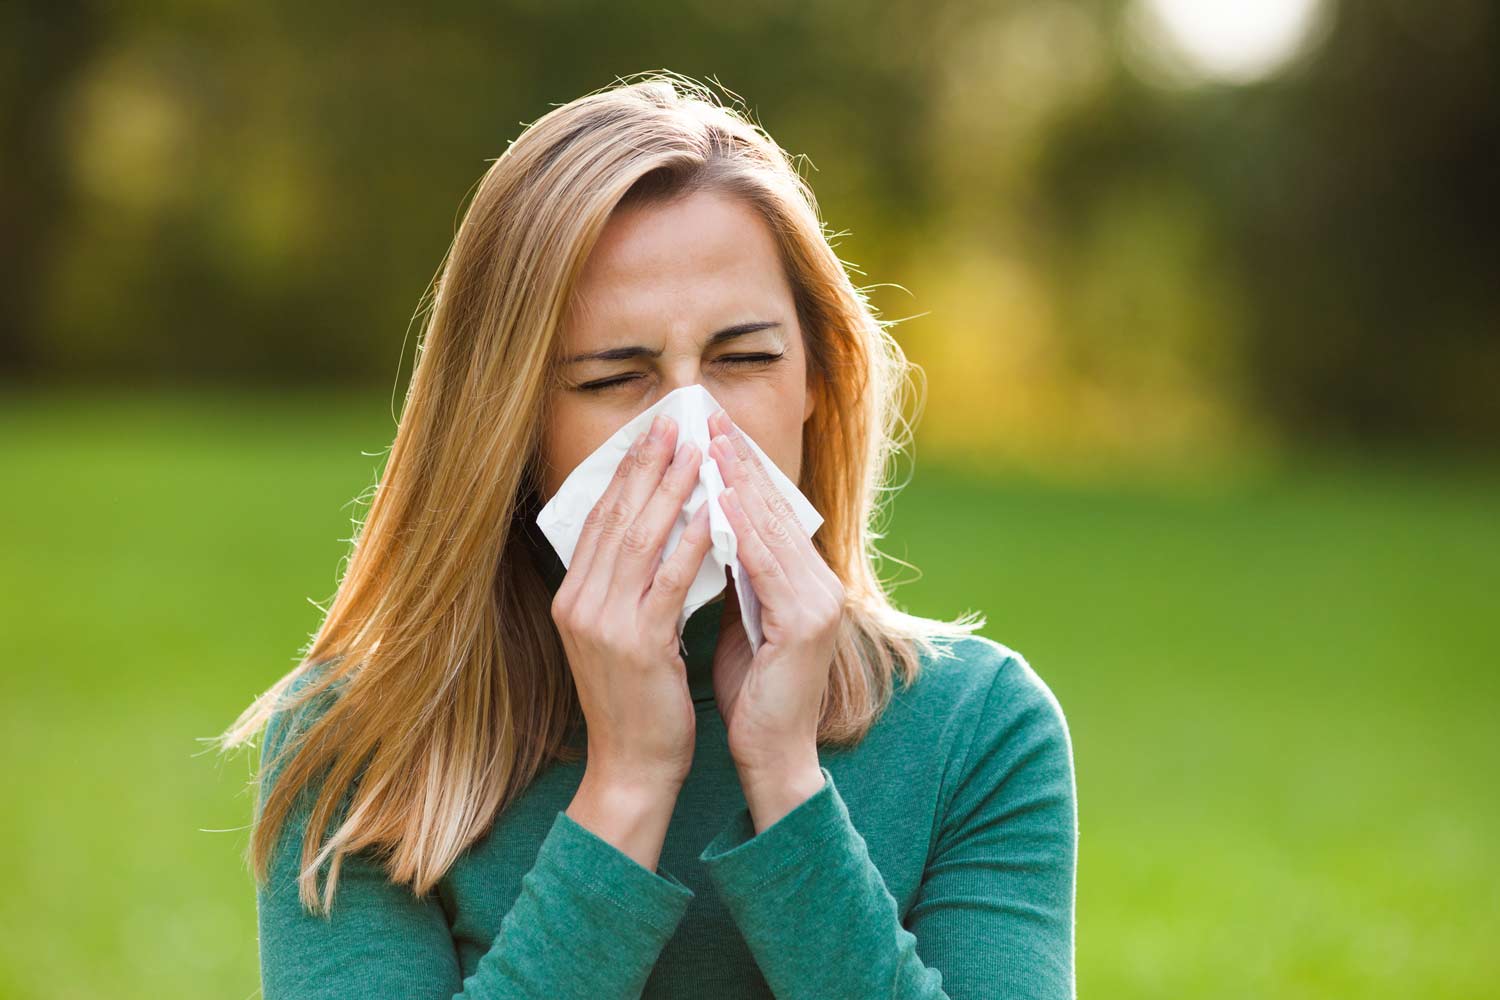 Allergy symptoms – unusual signs you may have an allergy